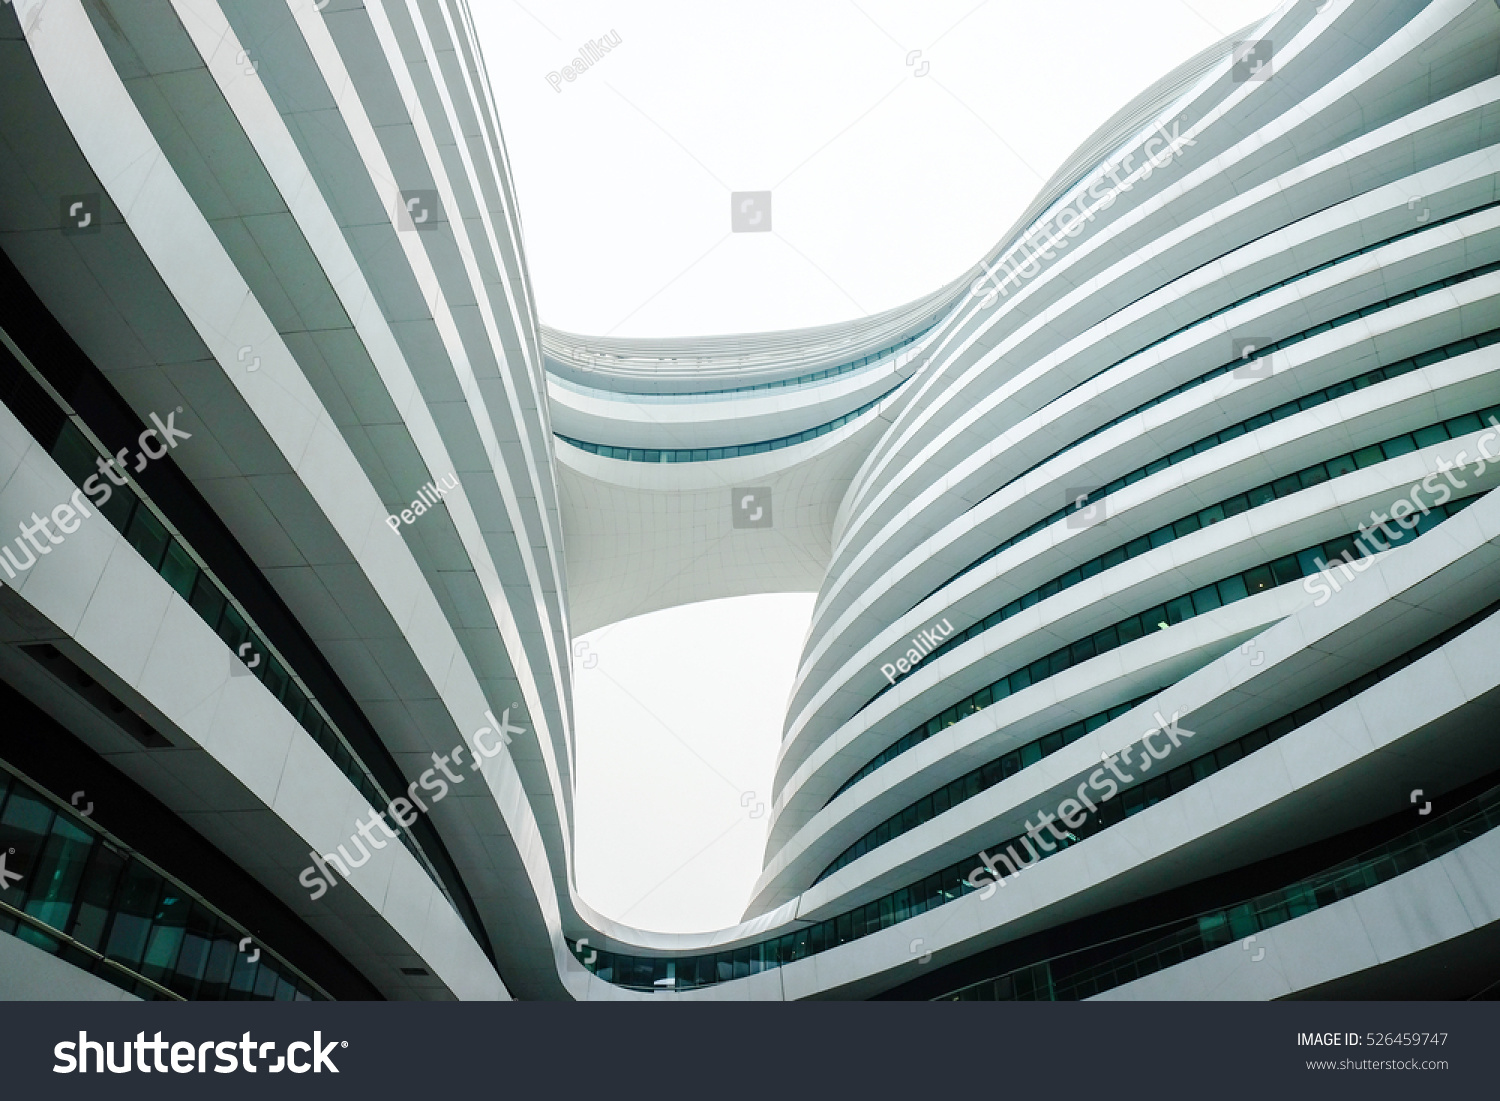 Galaxy Soho Project Central Beijing Contains Stock Photo 526459747 ...